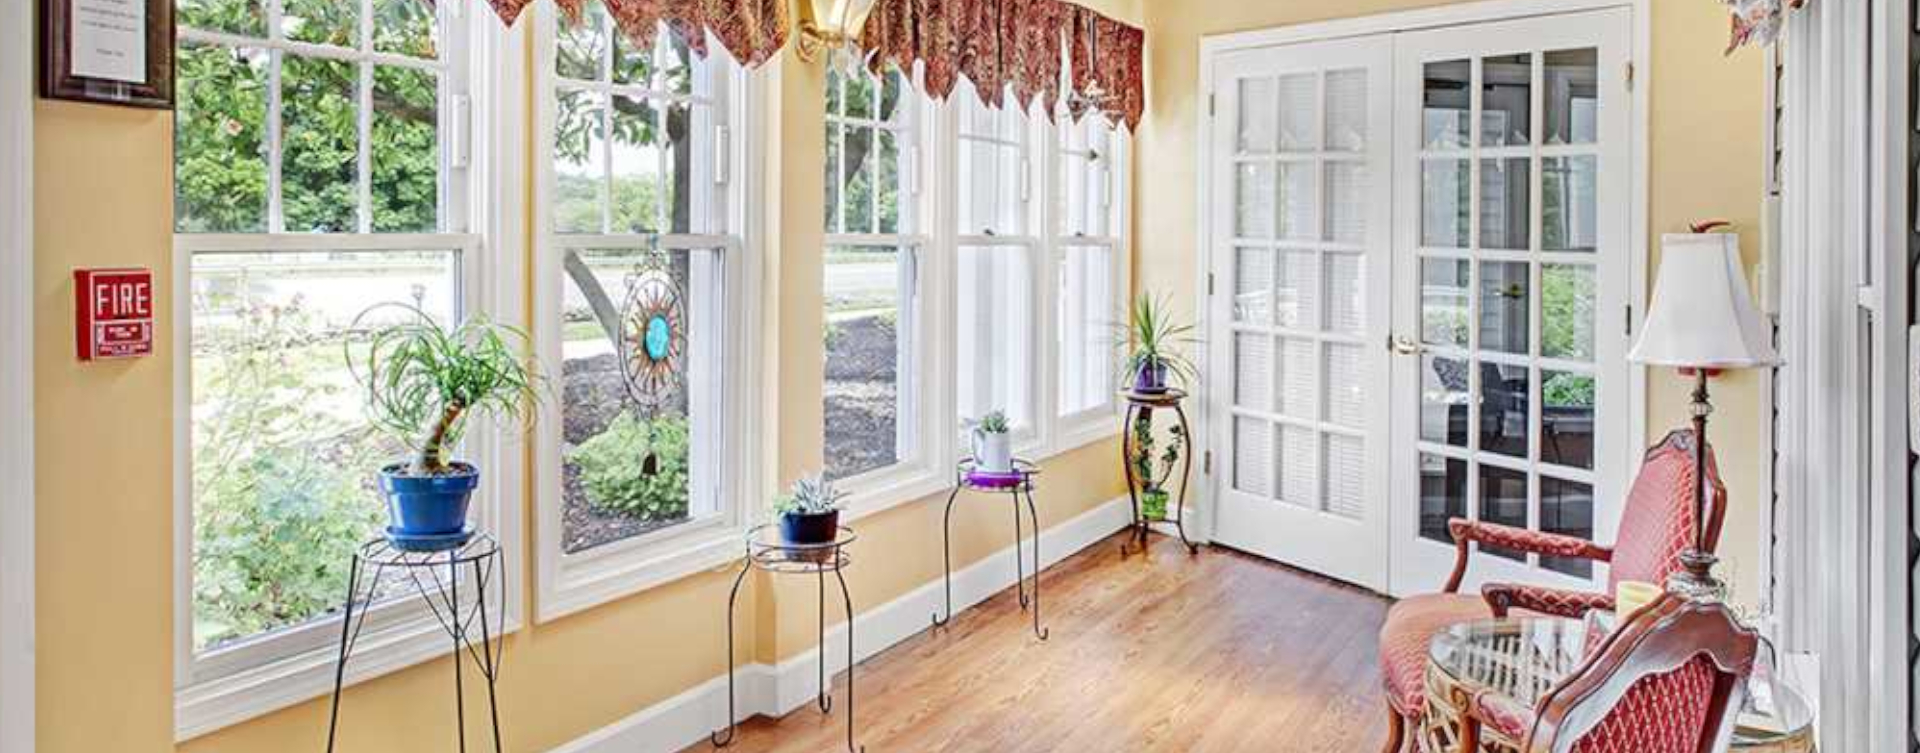 Enjoy the view of the outdoors from the sunroom at Bickford of Upper Arlington